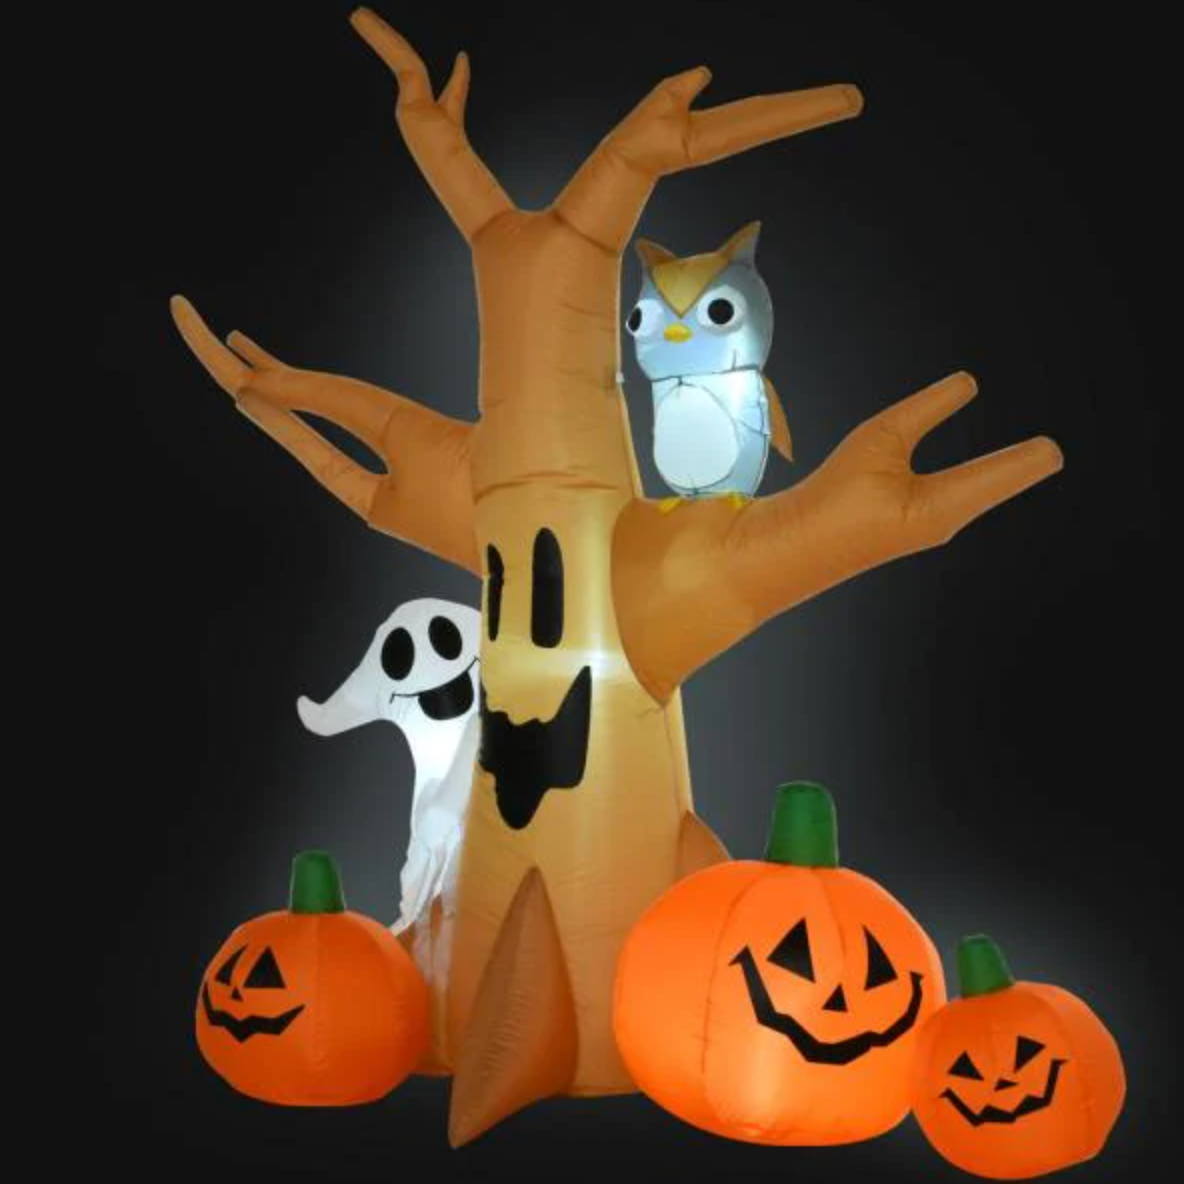 LED Haunted Tree With Owl, Ghost, and Pumpkins Halloween Inflatable